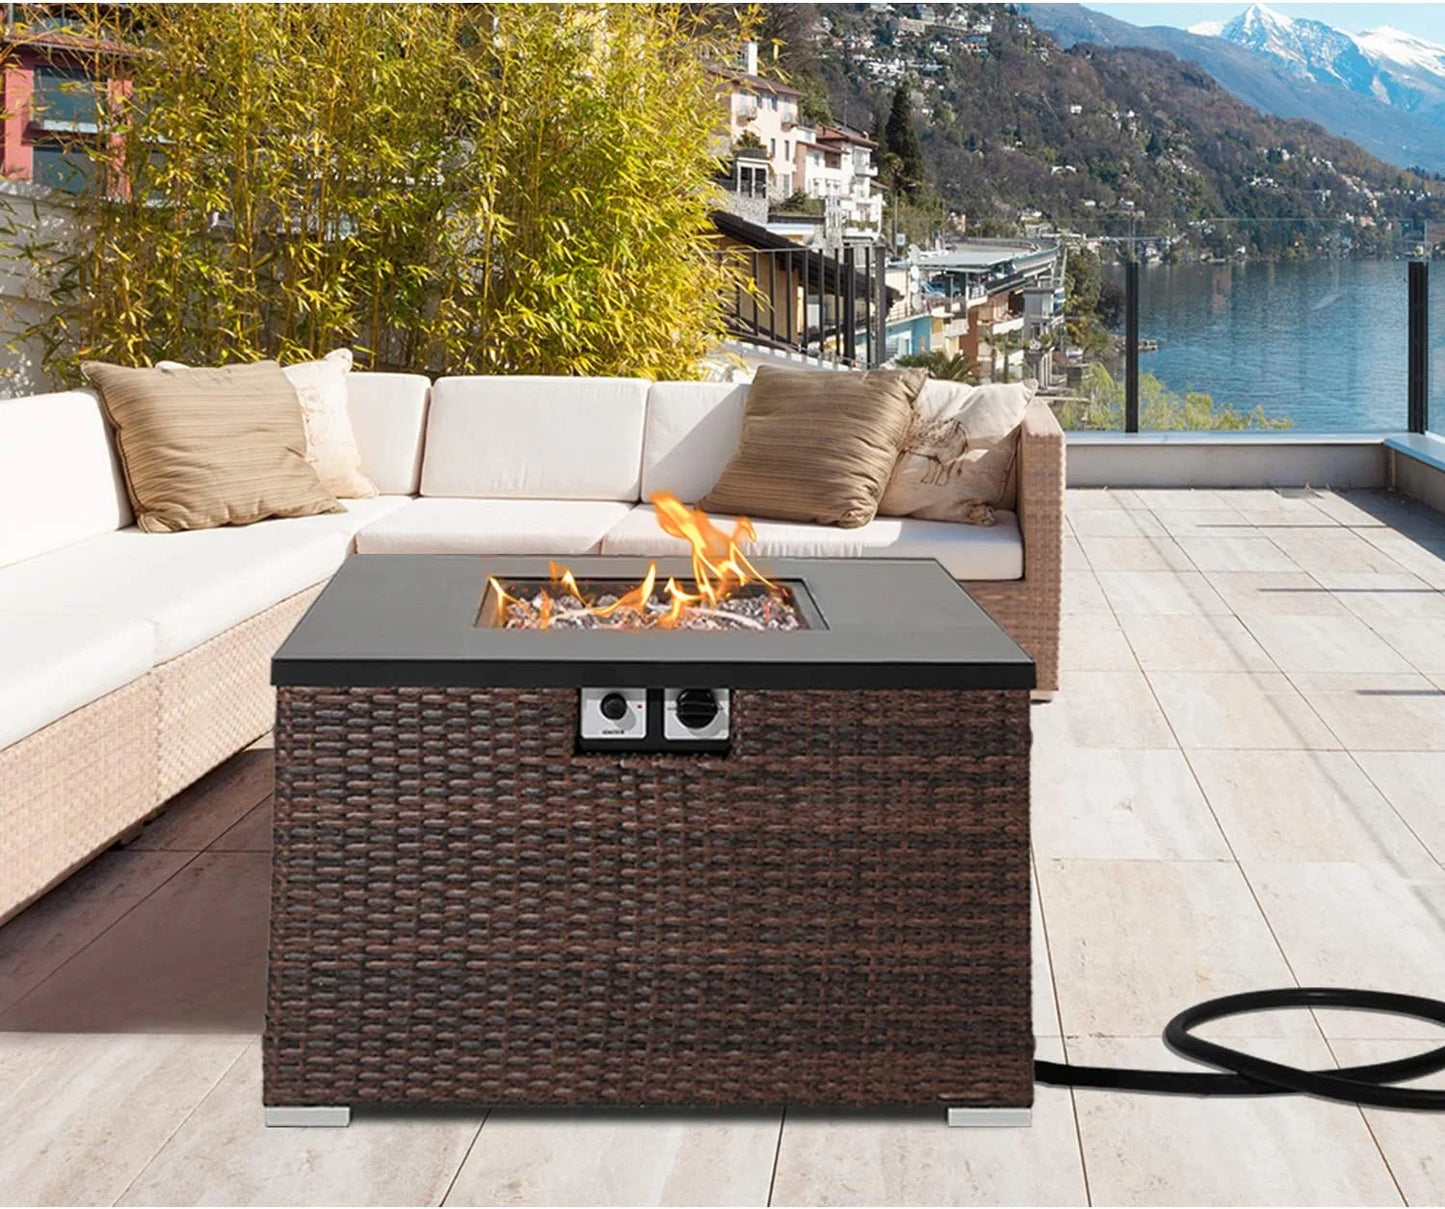 ZFGSUIJN Propane Patio Fire Pit Table  Lava Rocks and Rain Cover for Outdoor Leisure Party 40 000 BTU  Tank Outside  32-inch Square Dark Brown Wicker Fire Table